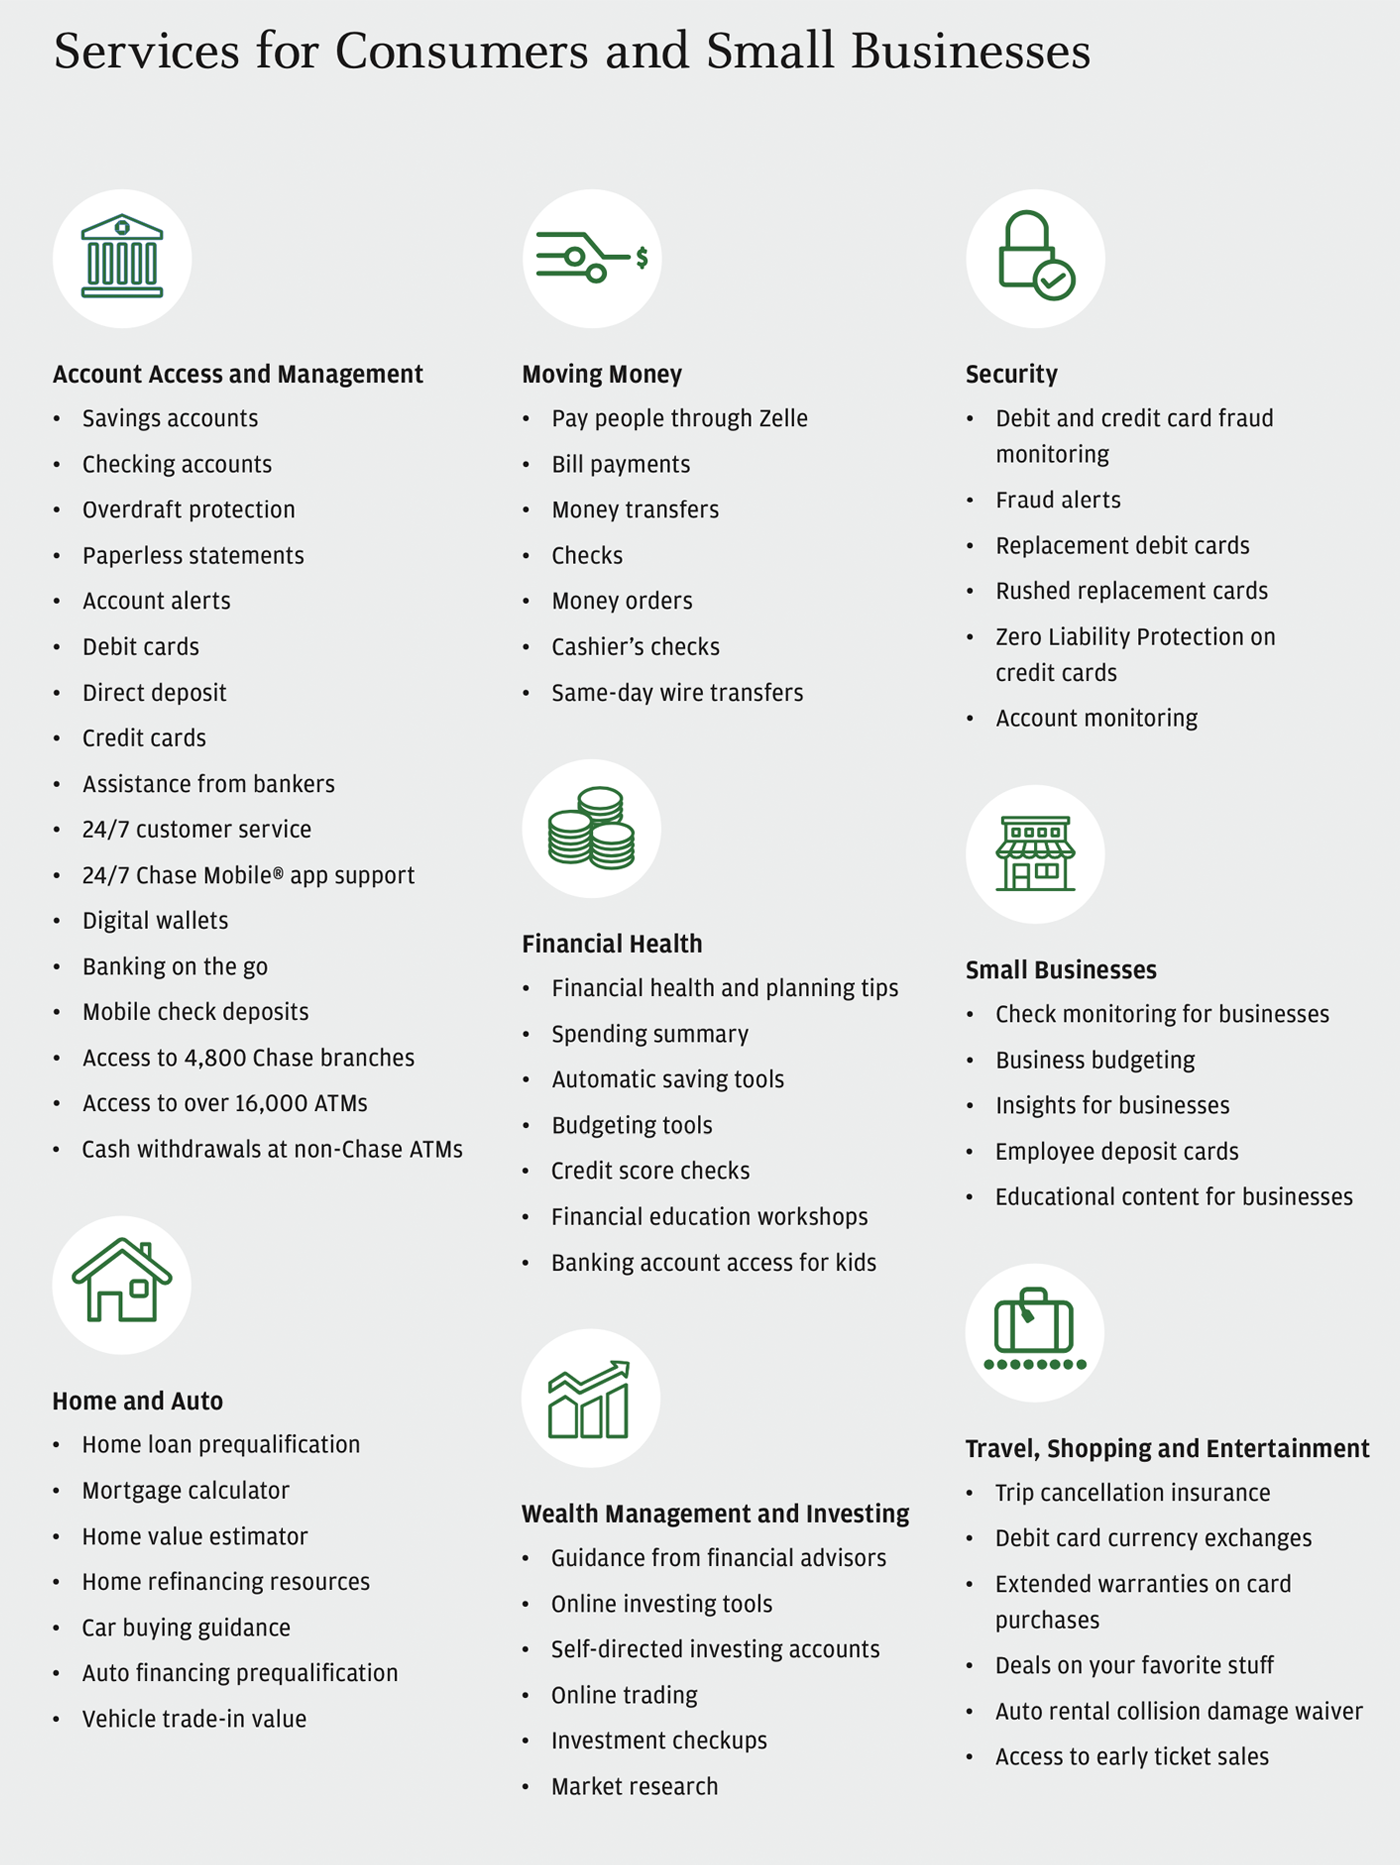 Chart showing services for consumers and small businesses